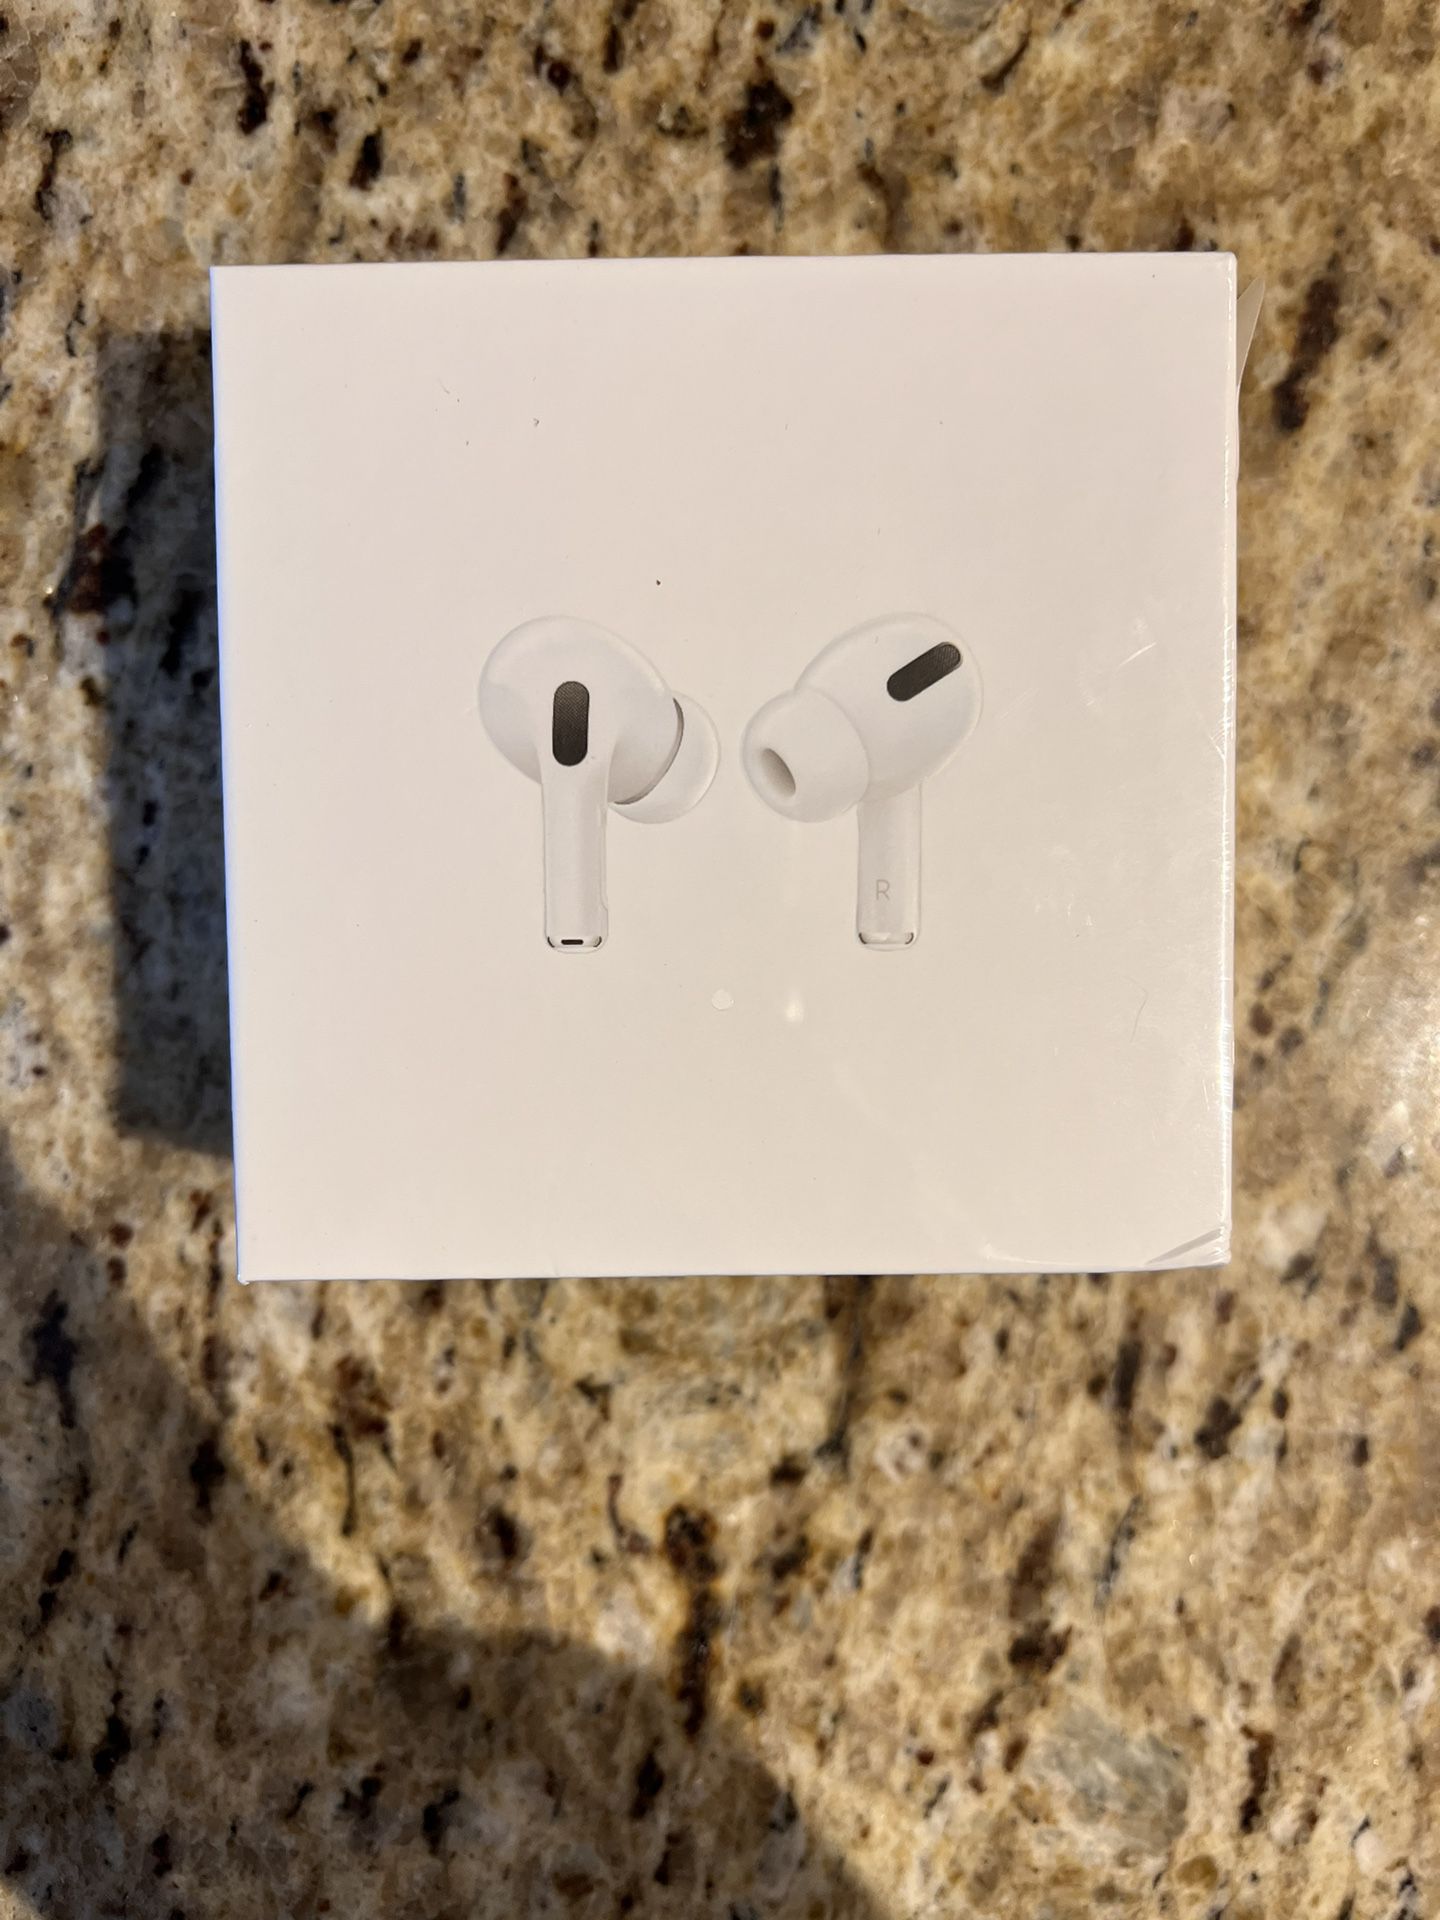 New AirPods Pro With MagSafe Charging Case